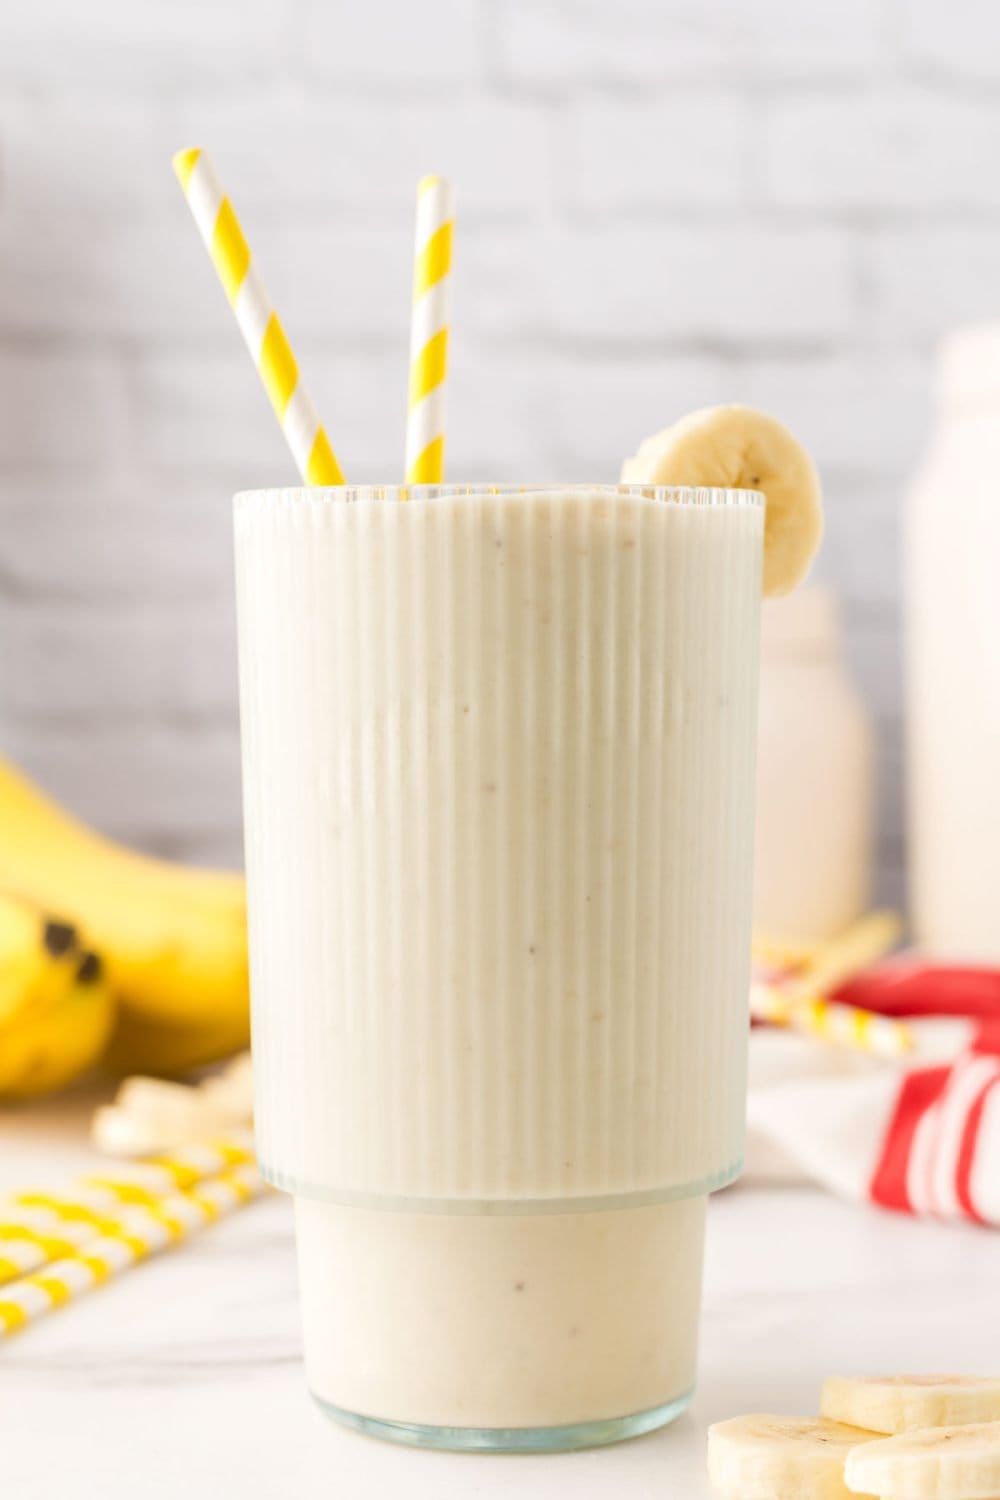 Banana smoothie in a glass with 2 straws.